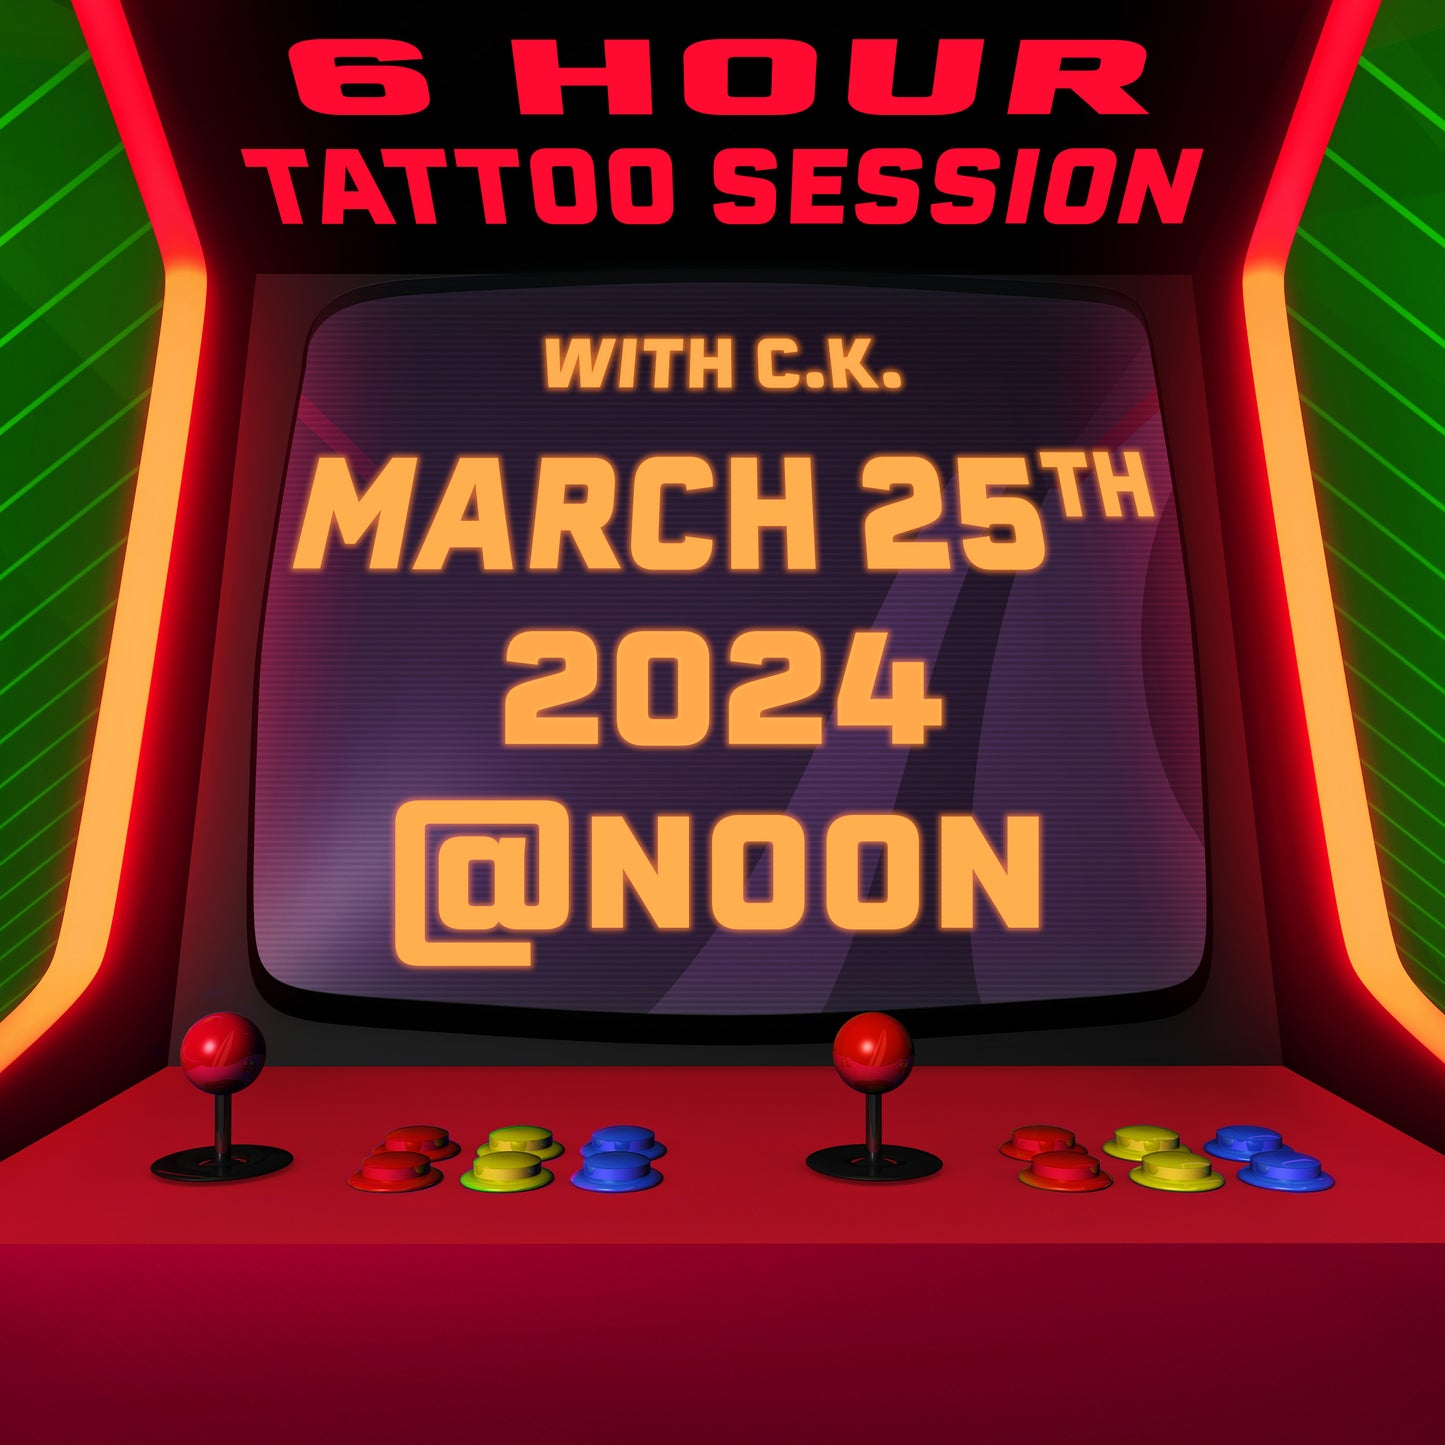 6 hour Tattoo Session with CK MARCH 25th, 2024